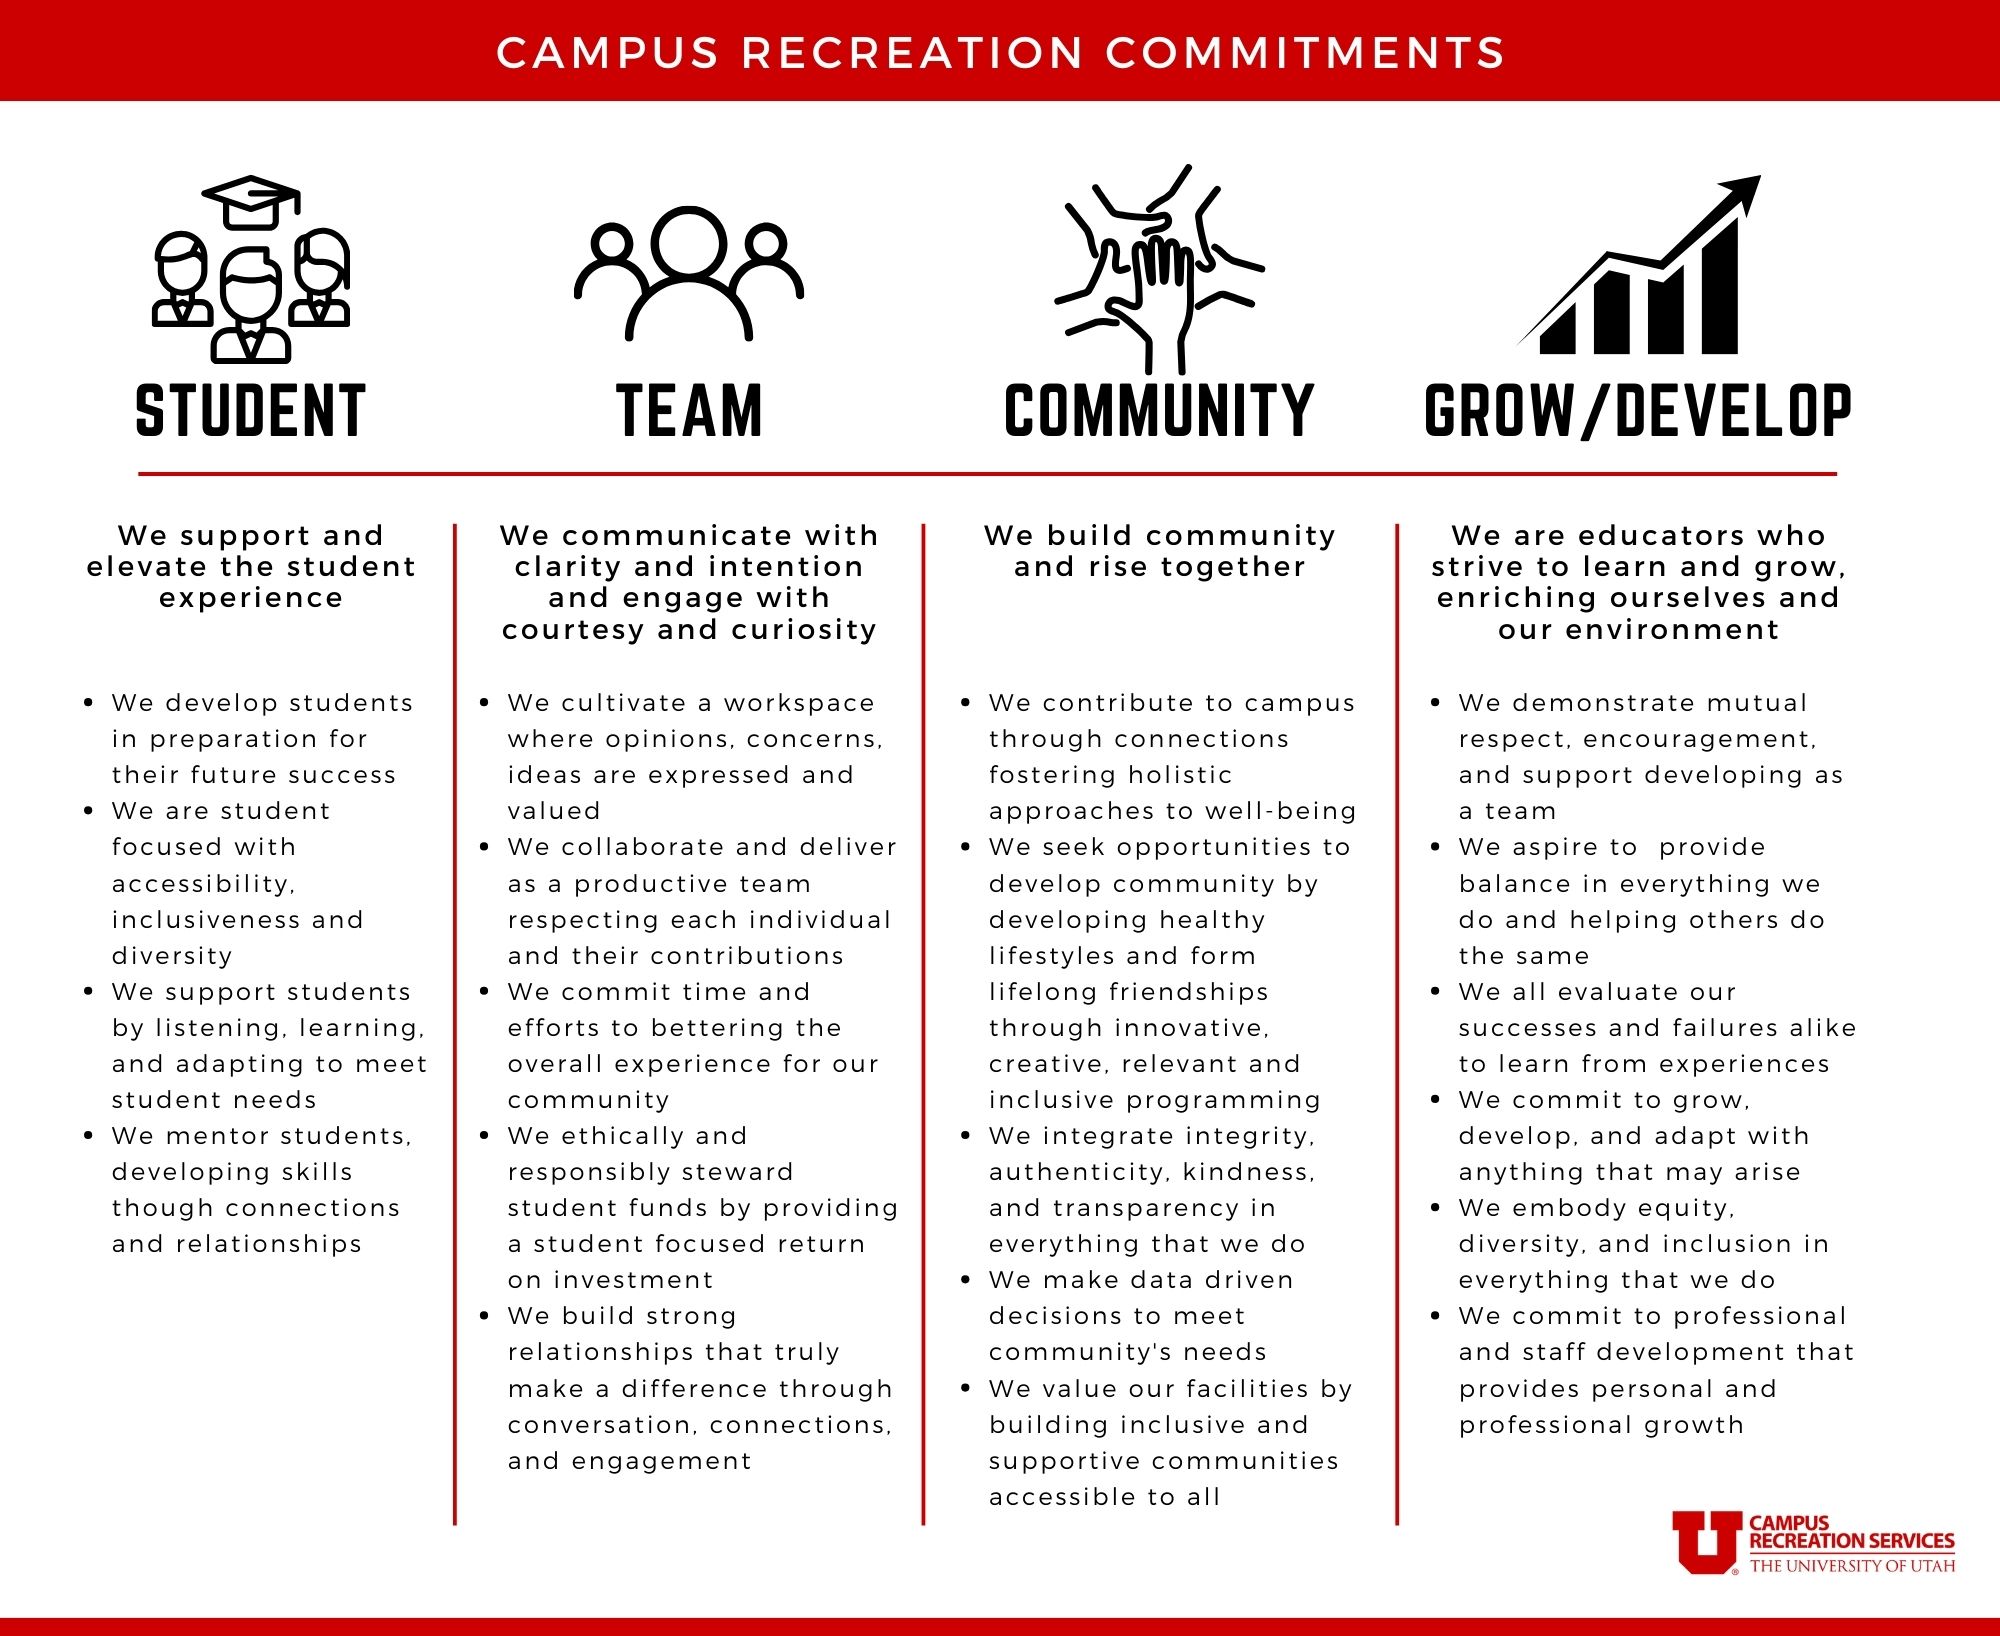 Campus Recreation Services Commitments